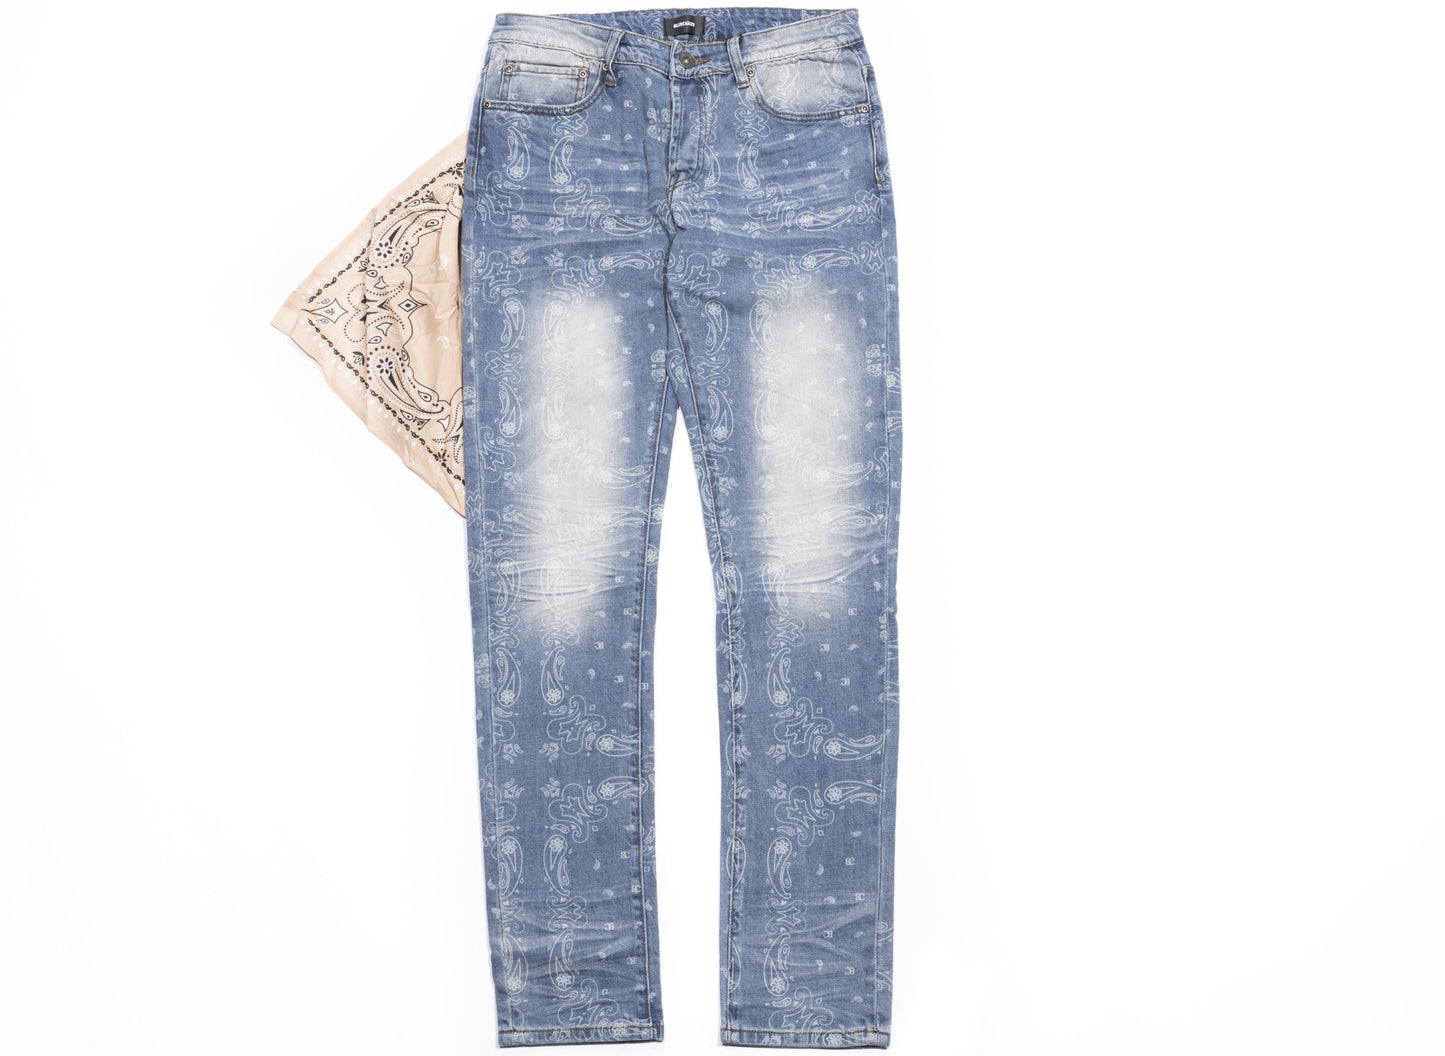 BLUECARATS The McQueen 5 Pocket Jeans